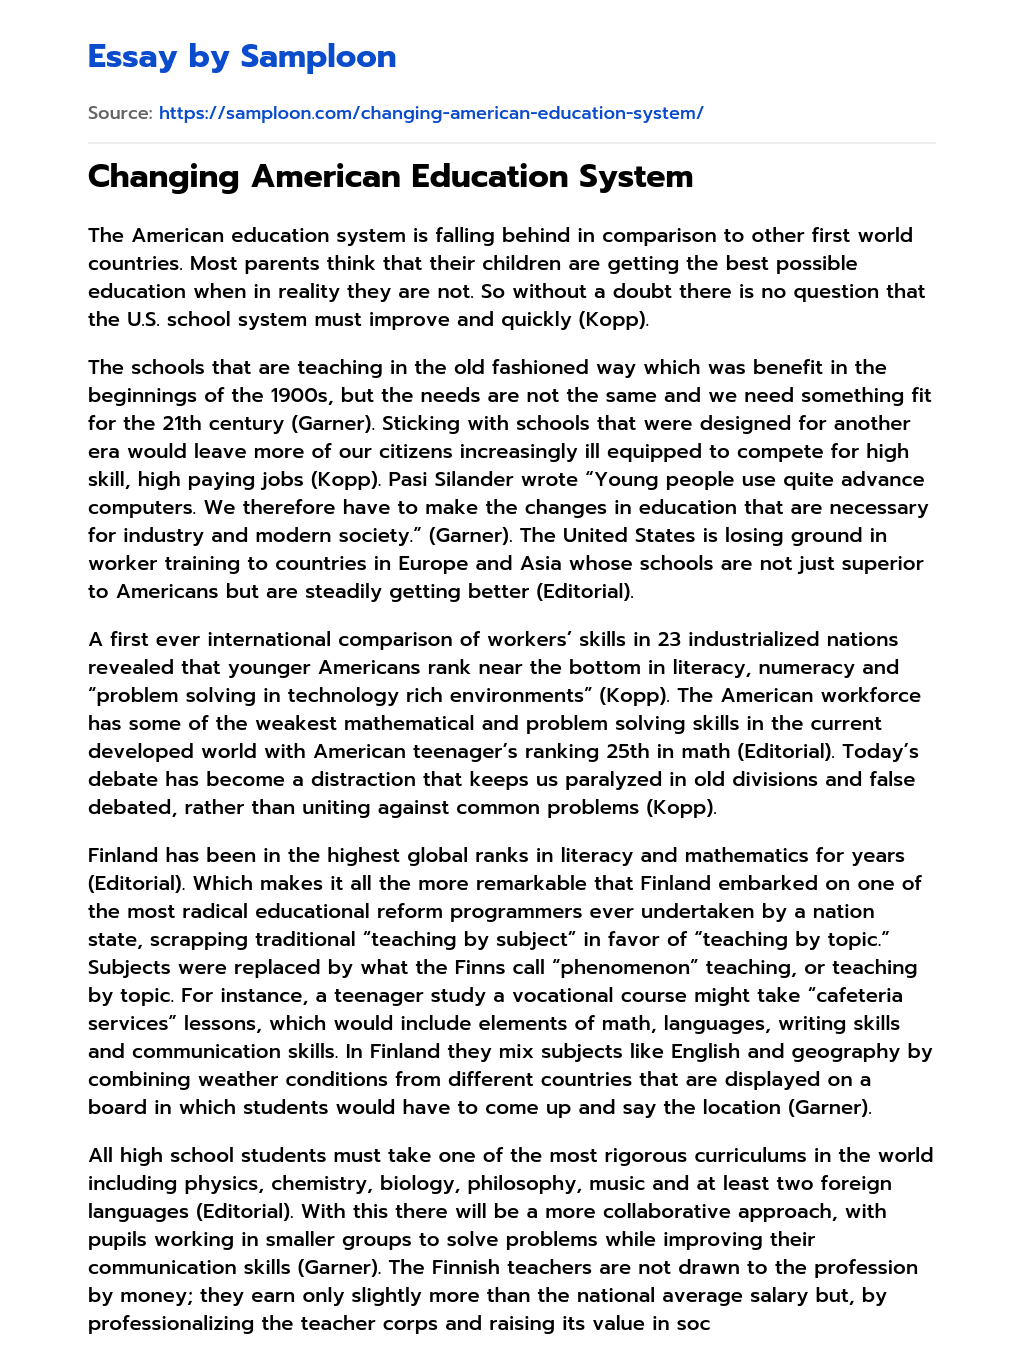 Changing American Education System essay